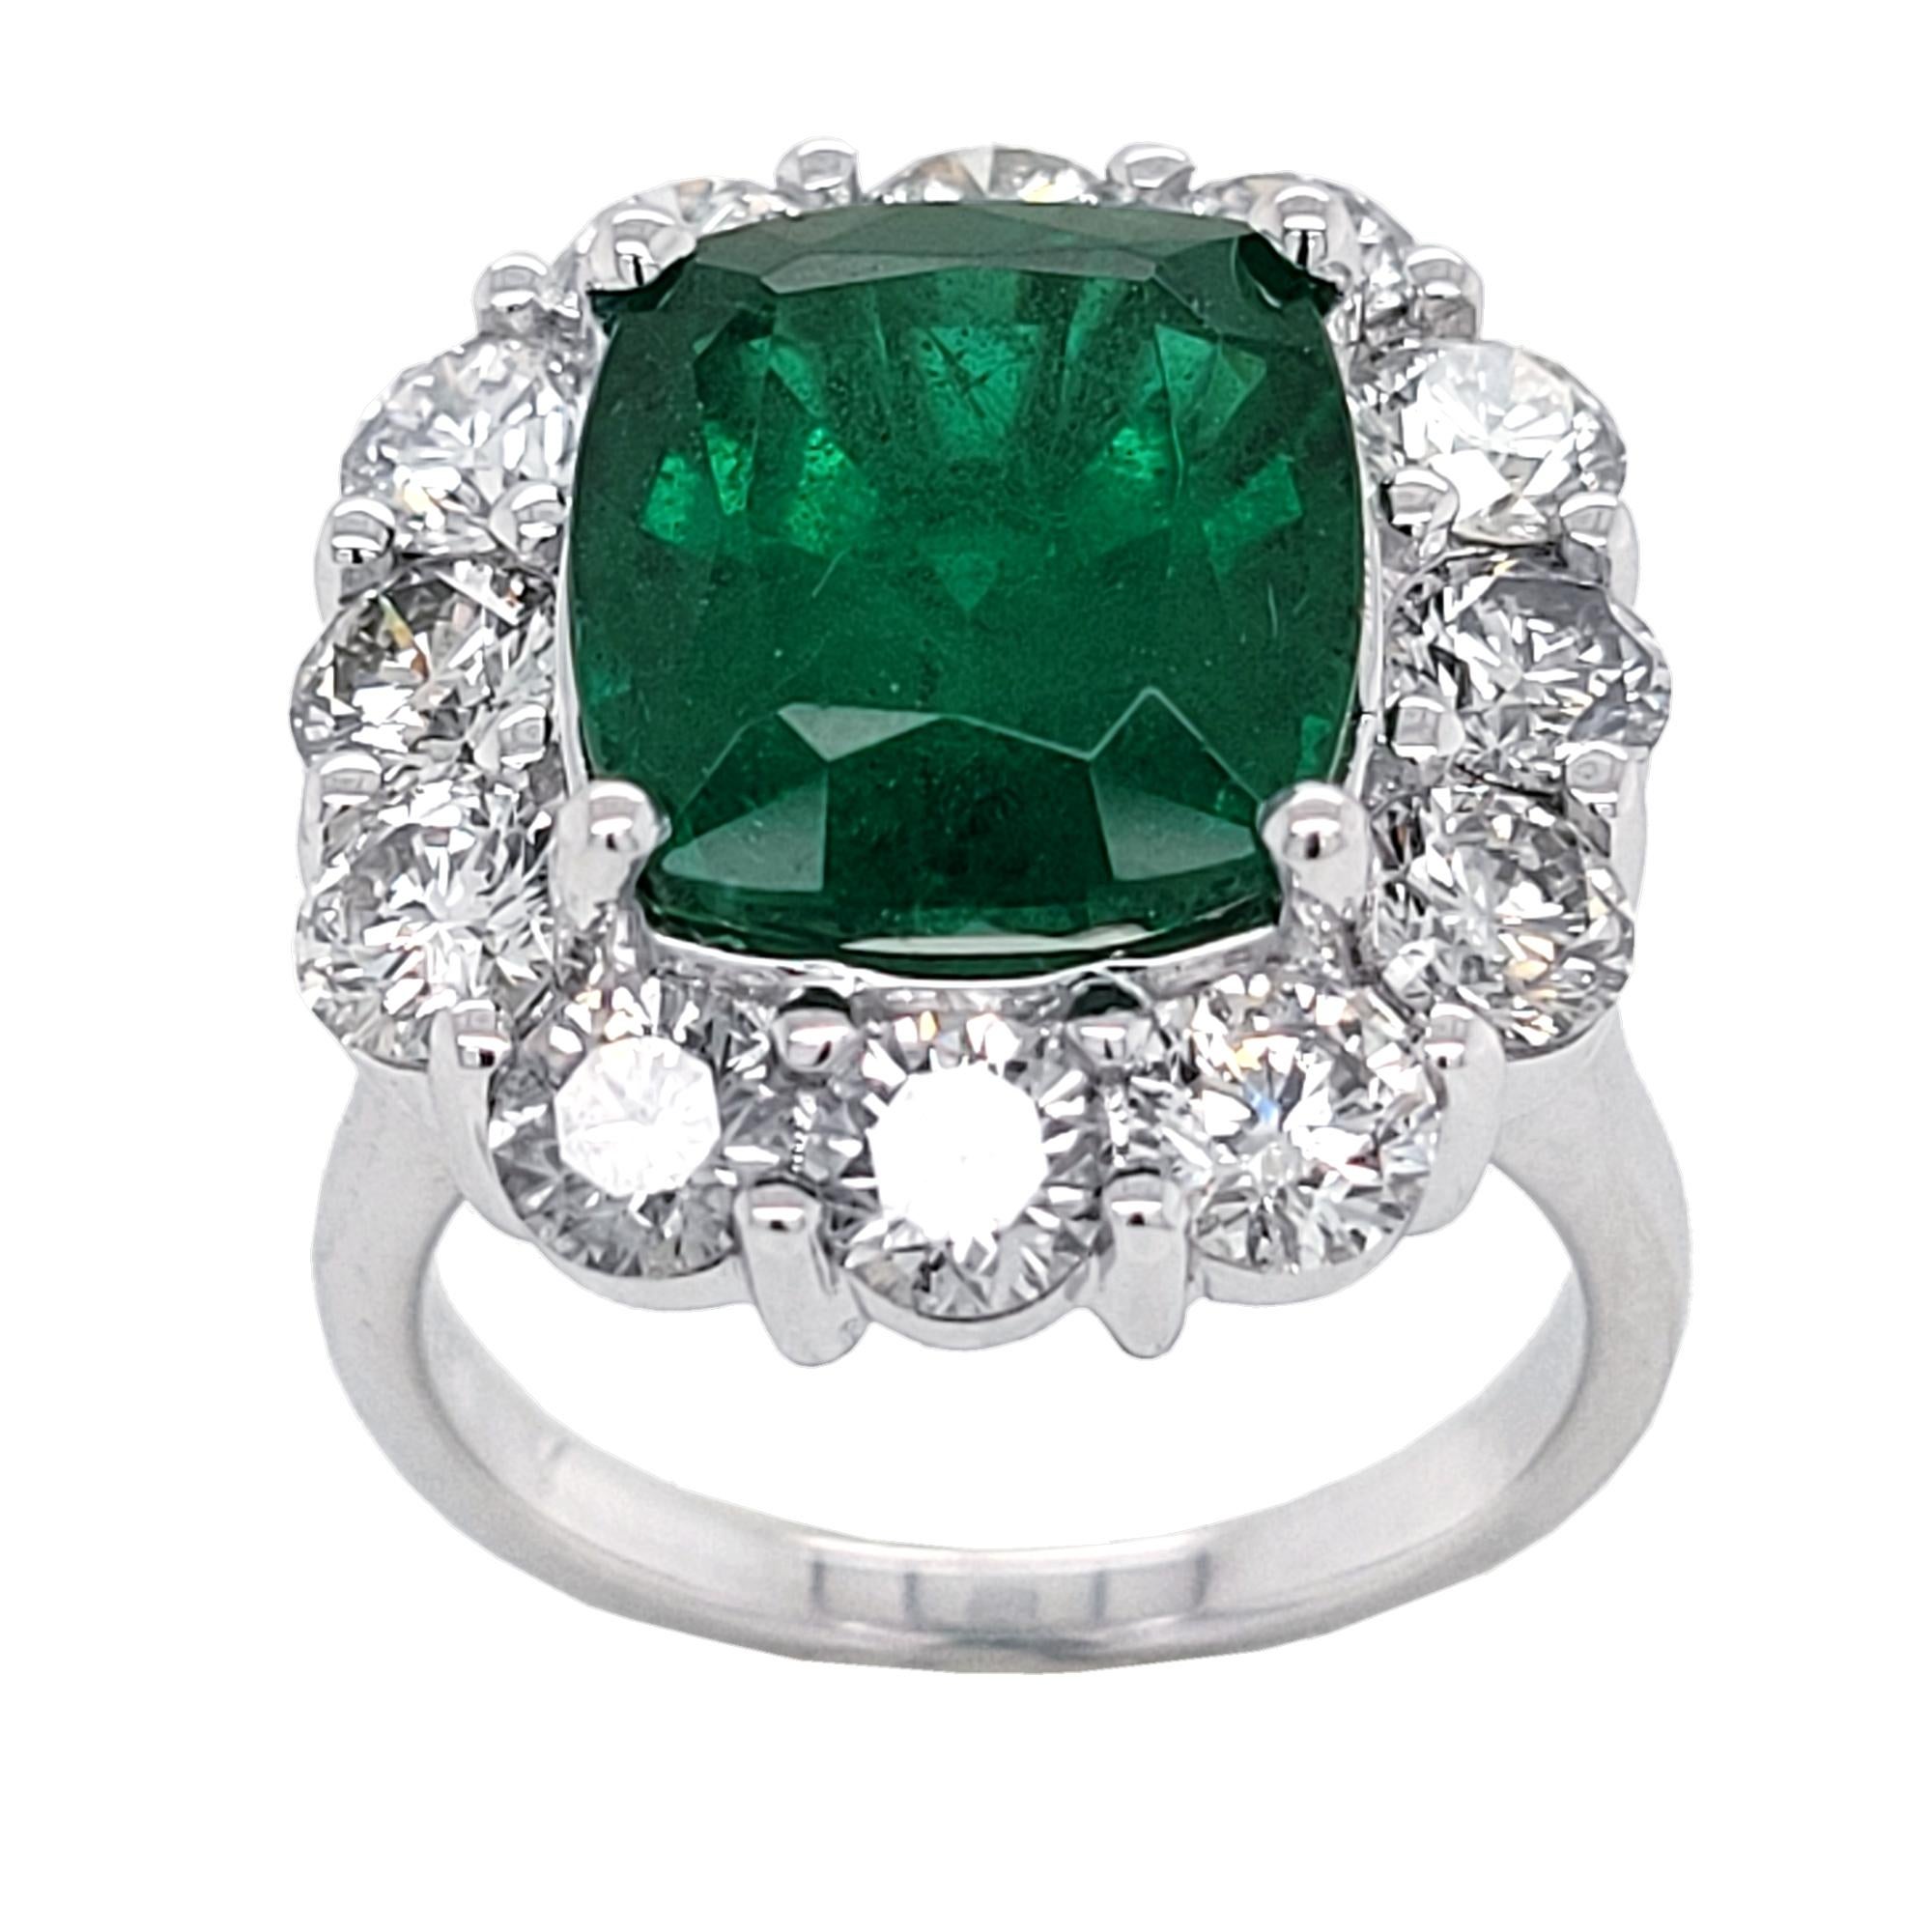 A beautiful color 5.88 Ct Cushion shaped Natural Emerald set in the center of an 18K pave set diamond engagement ring with a halo with Total 2.90 Ct Diamonds. 

Details:
Center Stone: 5.88 carat GIA Certified Cushion Emerald
Side Stone Diamonds: